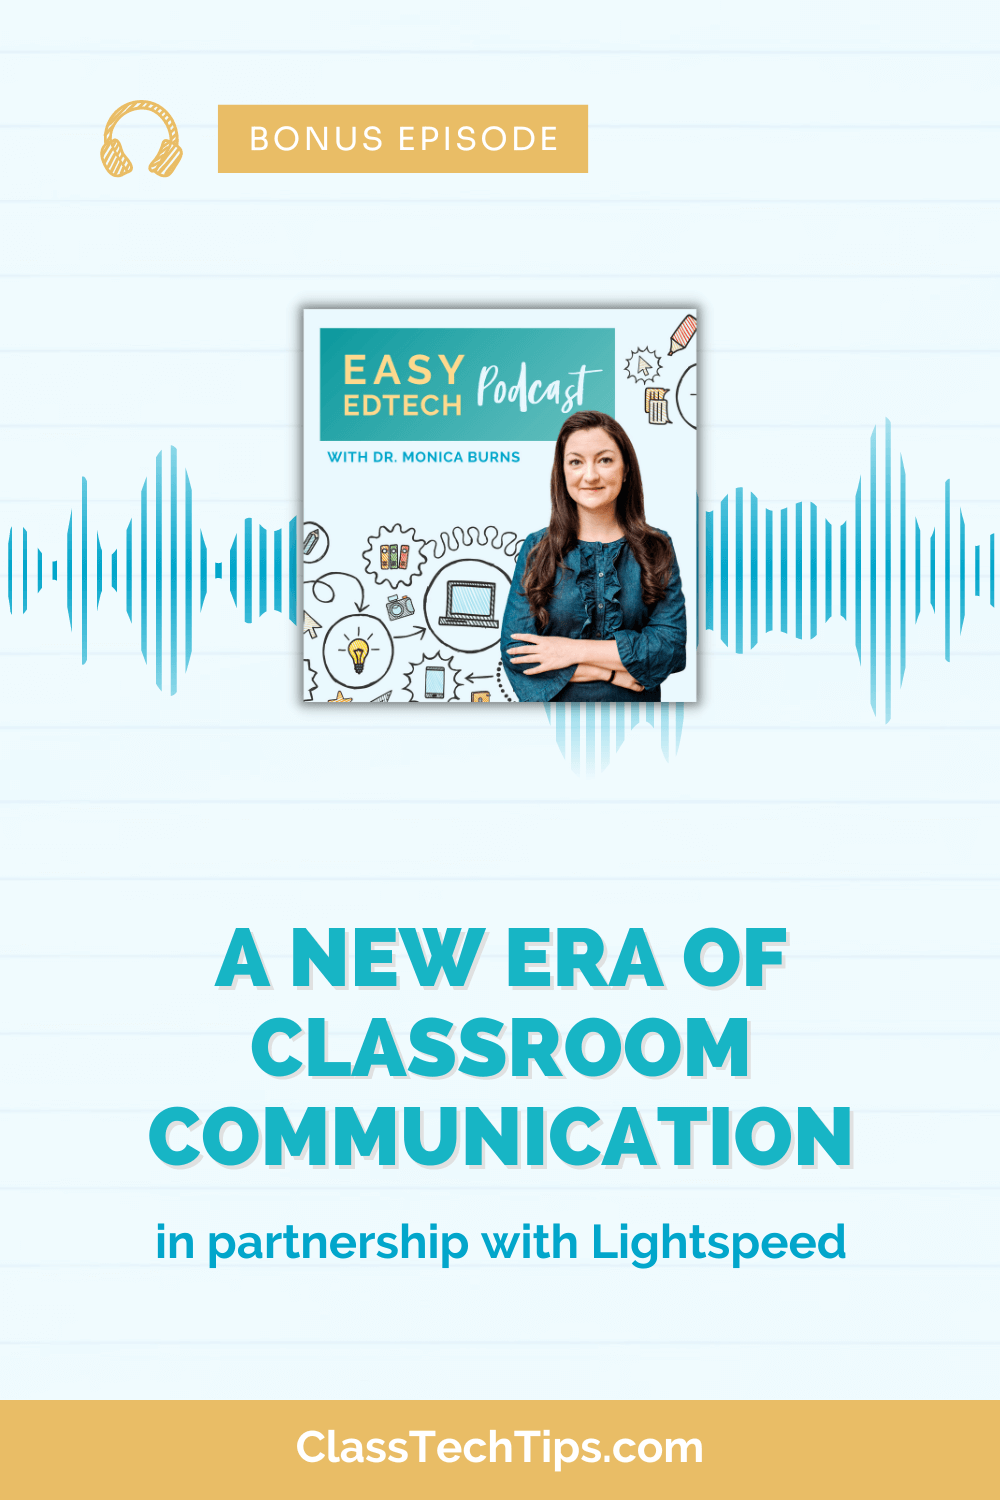 Featured image for the podcast episode showcasing the podcast logo with dynamic sound waves in the background, symbolizing the topic of advanced audio communication in classrooms.